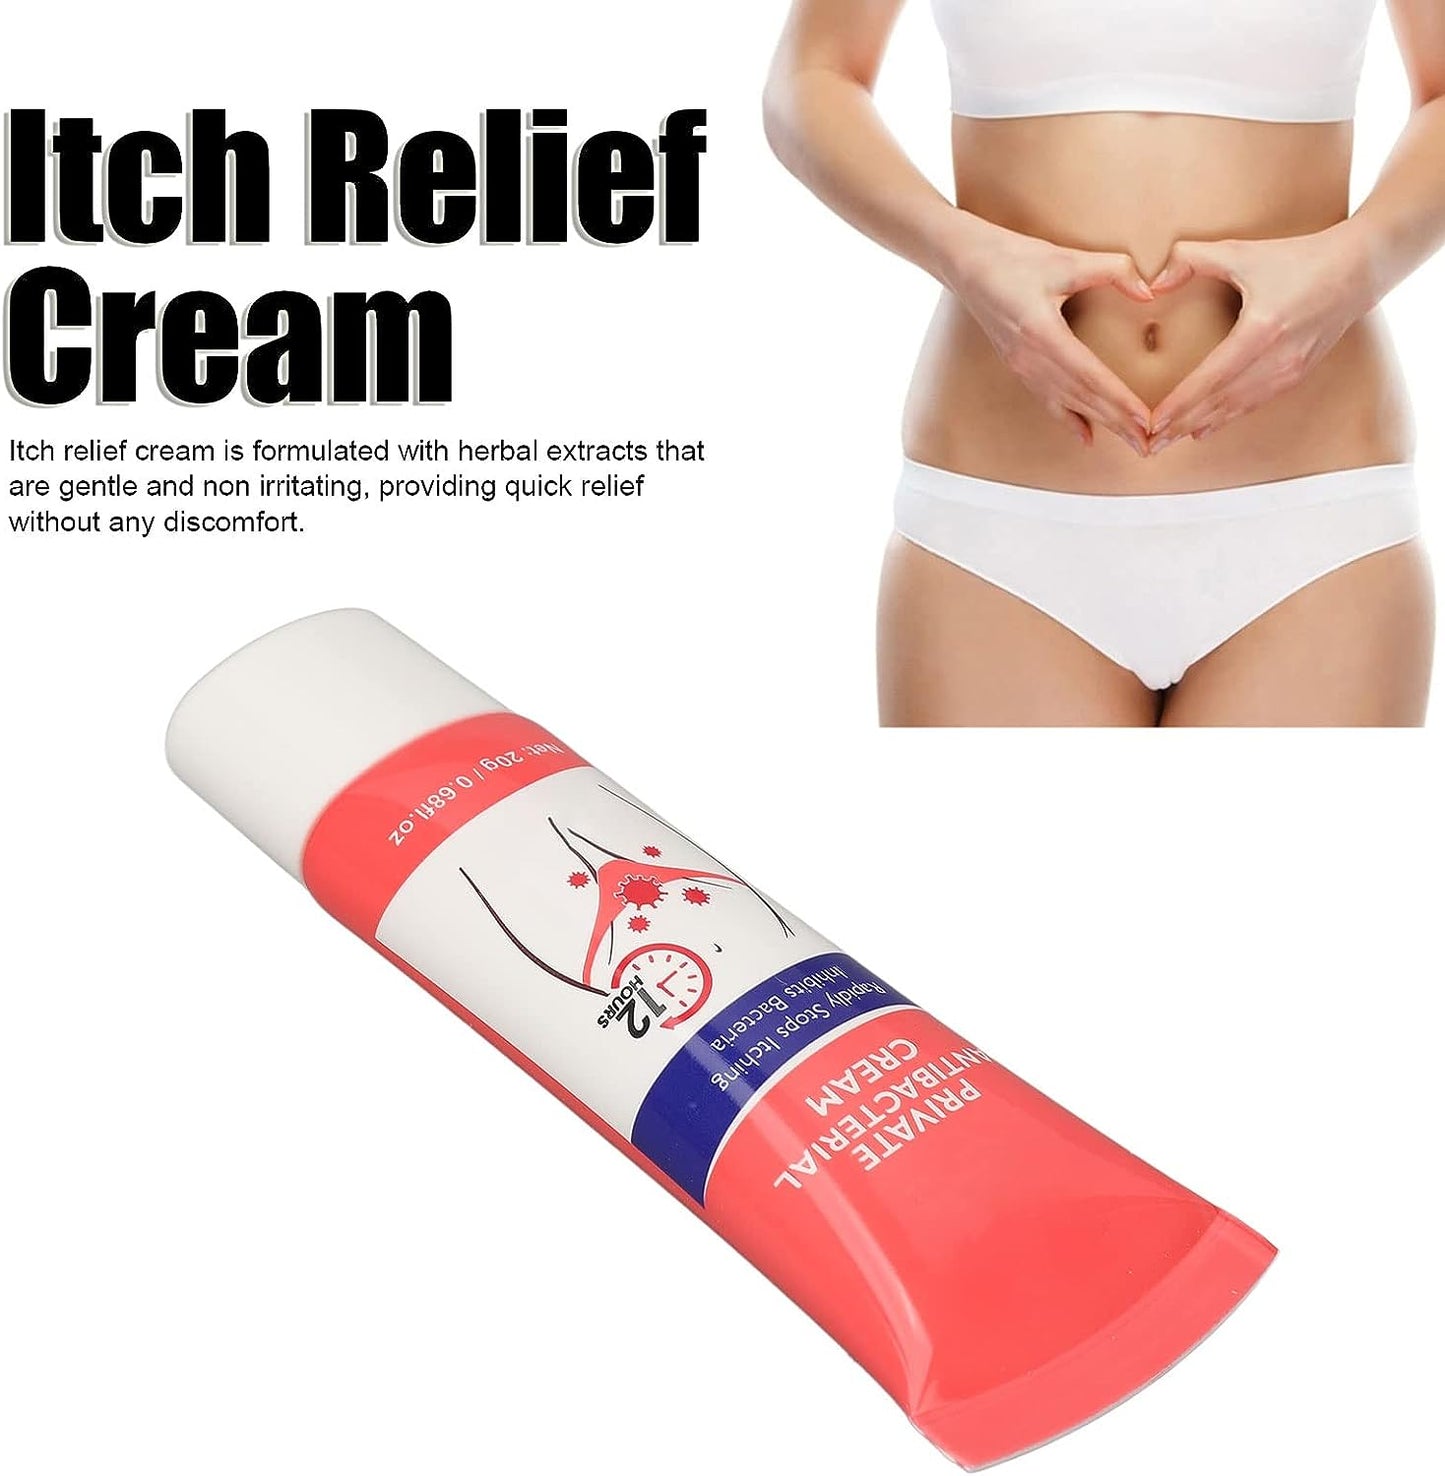 Aichun Beauty Private Parts Anti-Itch Cream, Anti-Itch Moisturizing Helps Relieve Genital Itching, Fast-acting and Soothes 20g